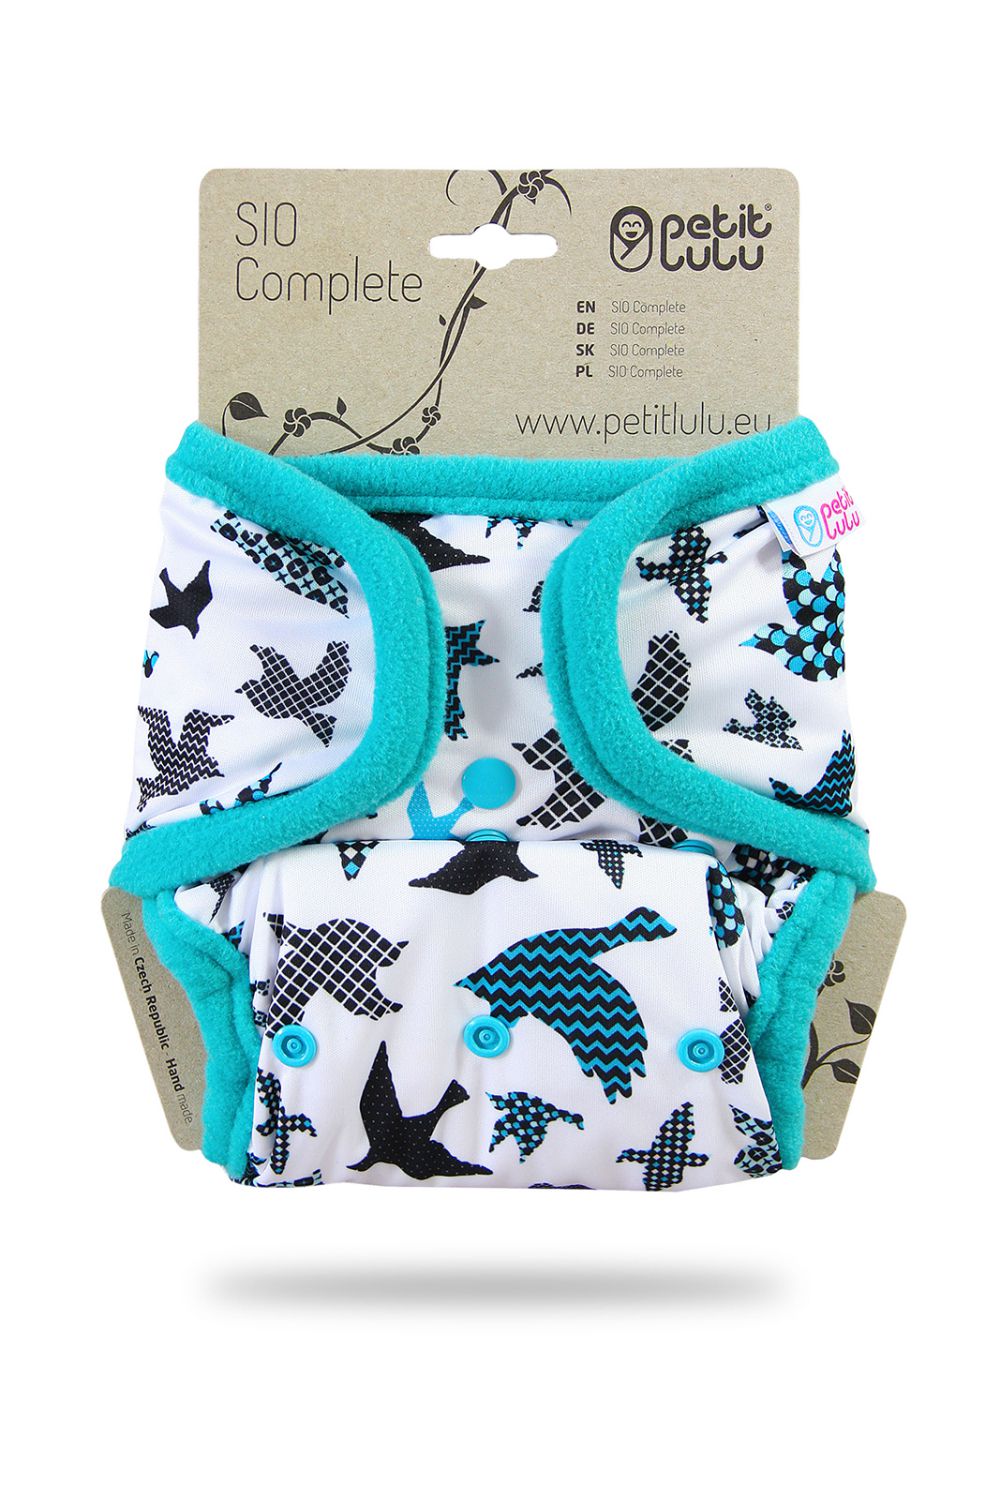 Petit Lulu One Size SIO Complete with Inserts (Snaps) Petit Lulu pattern: Turquoise Birds